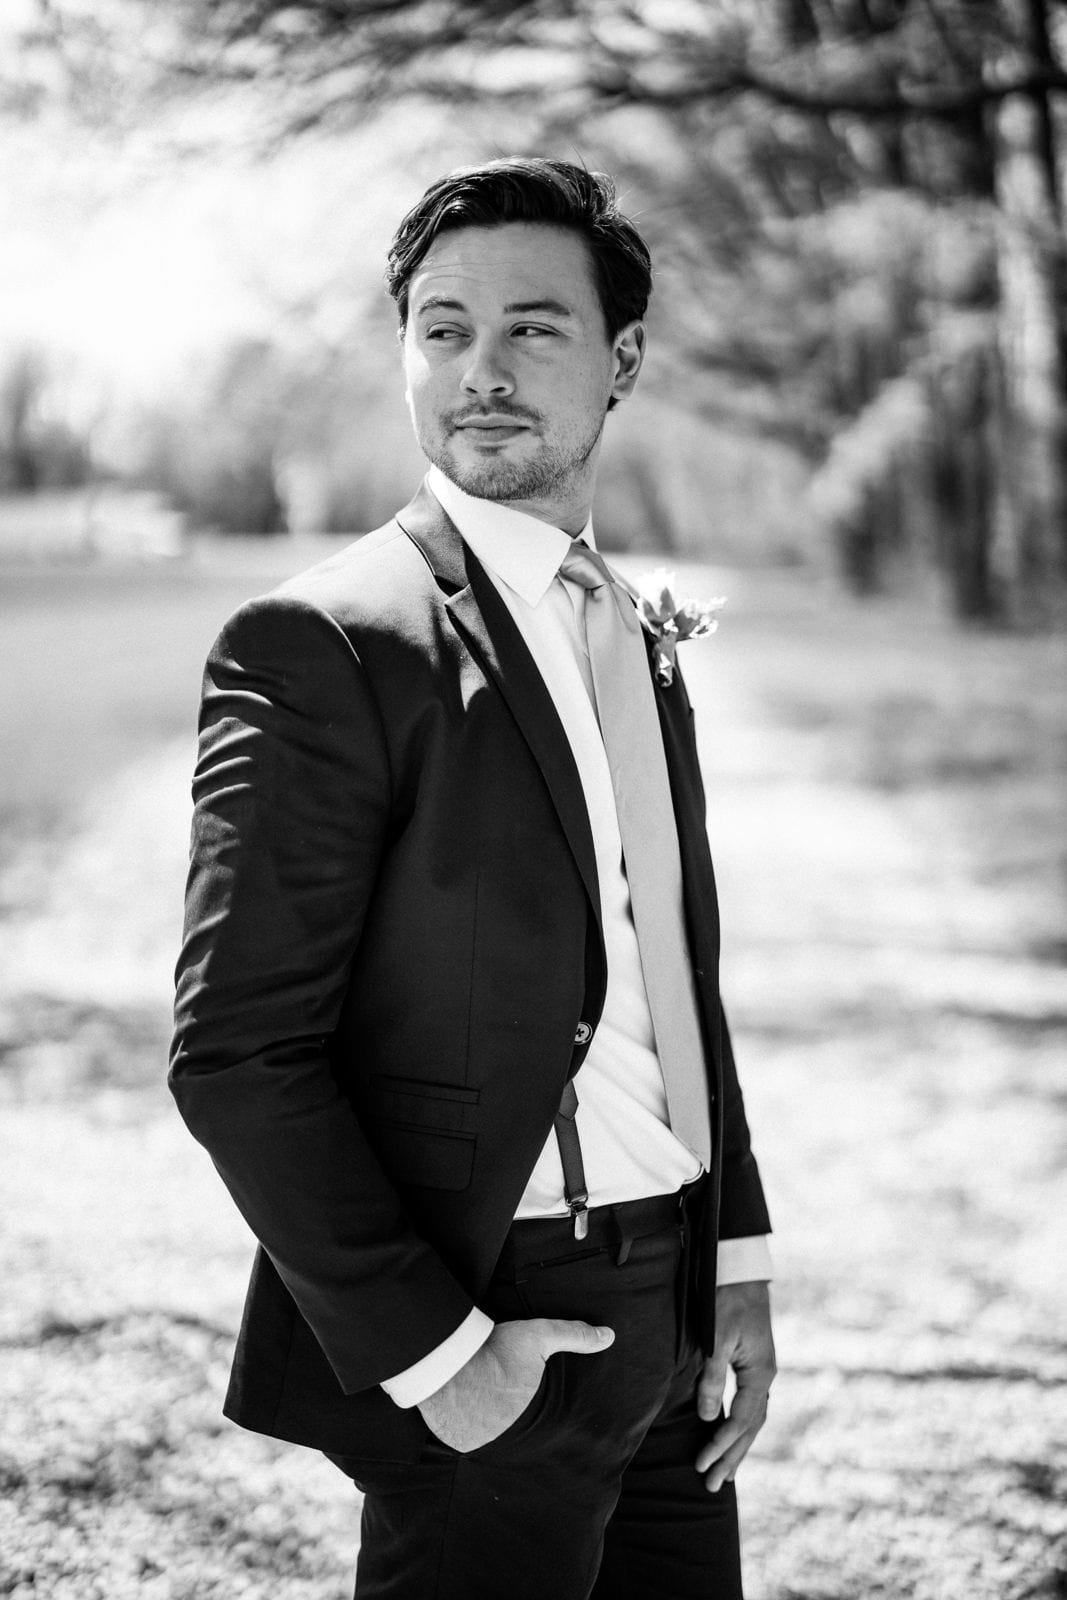 Groom poses in black and white portrait